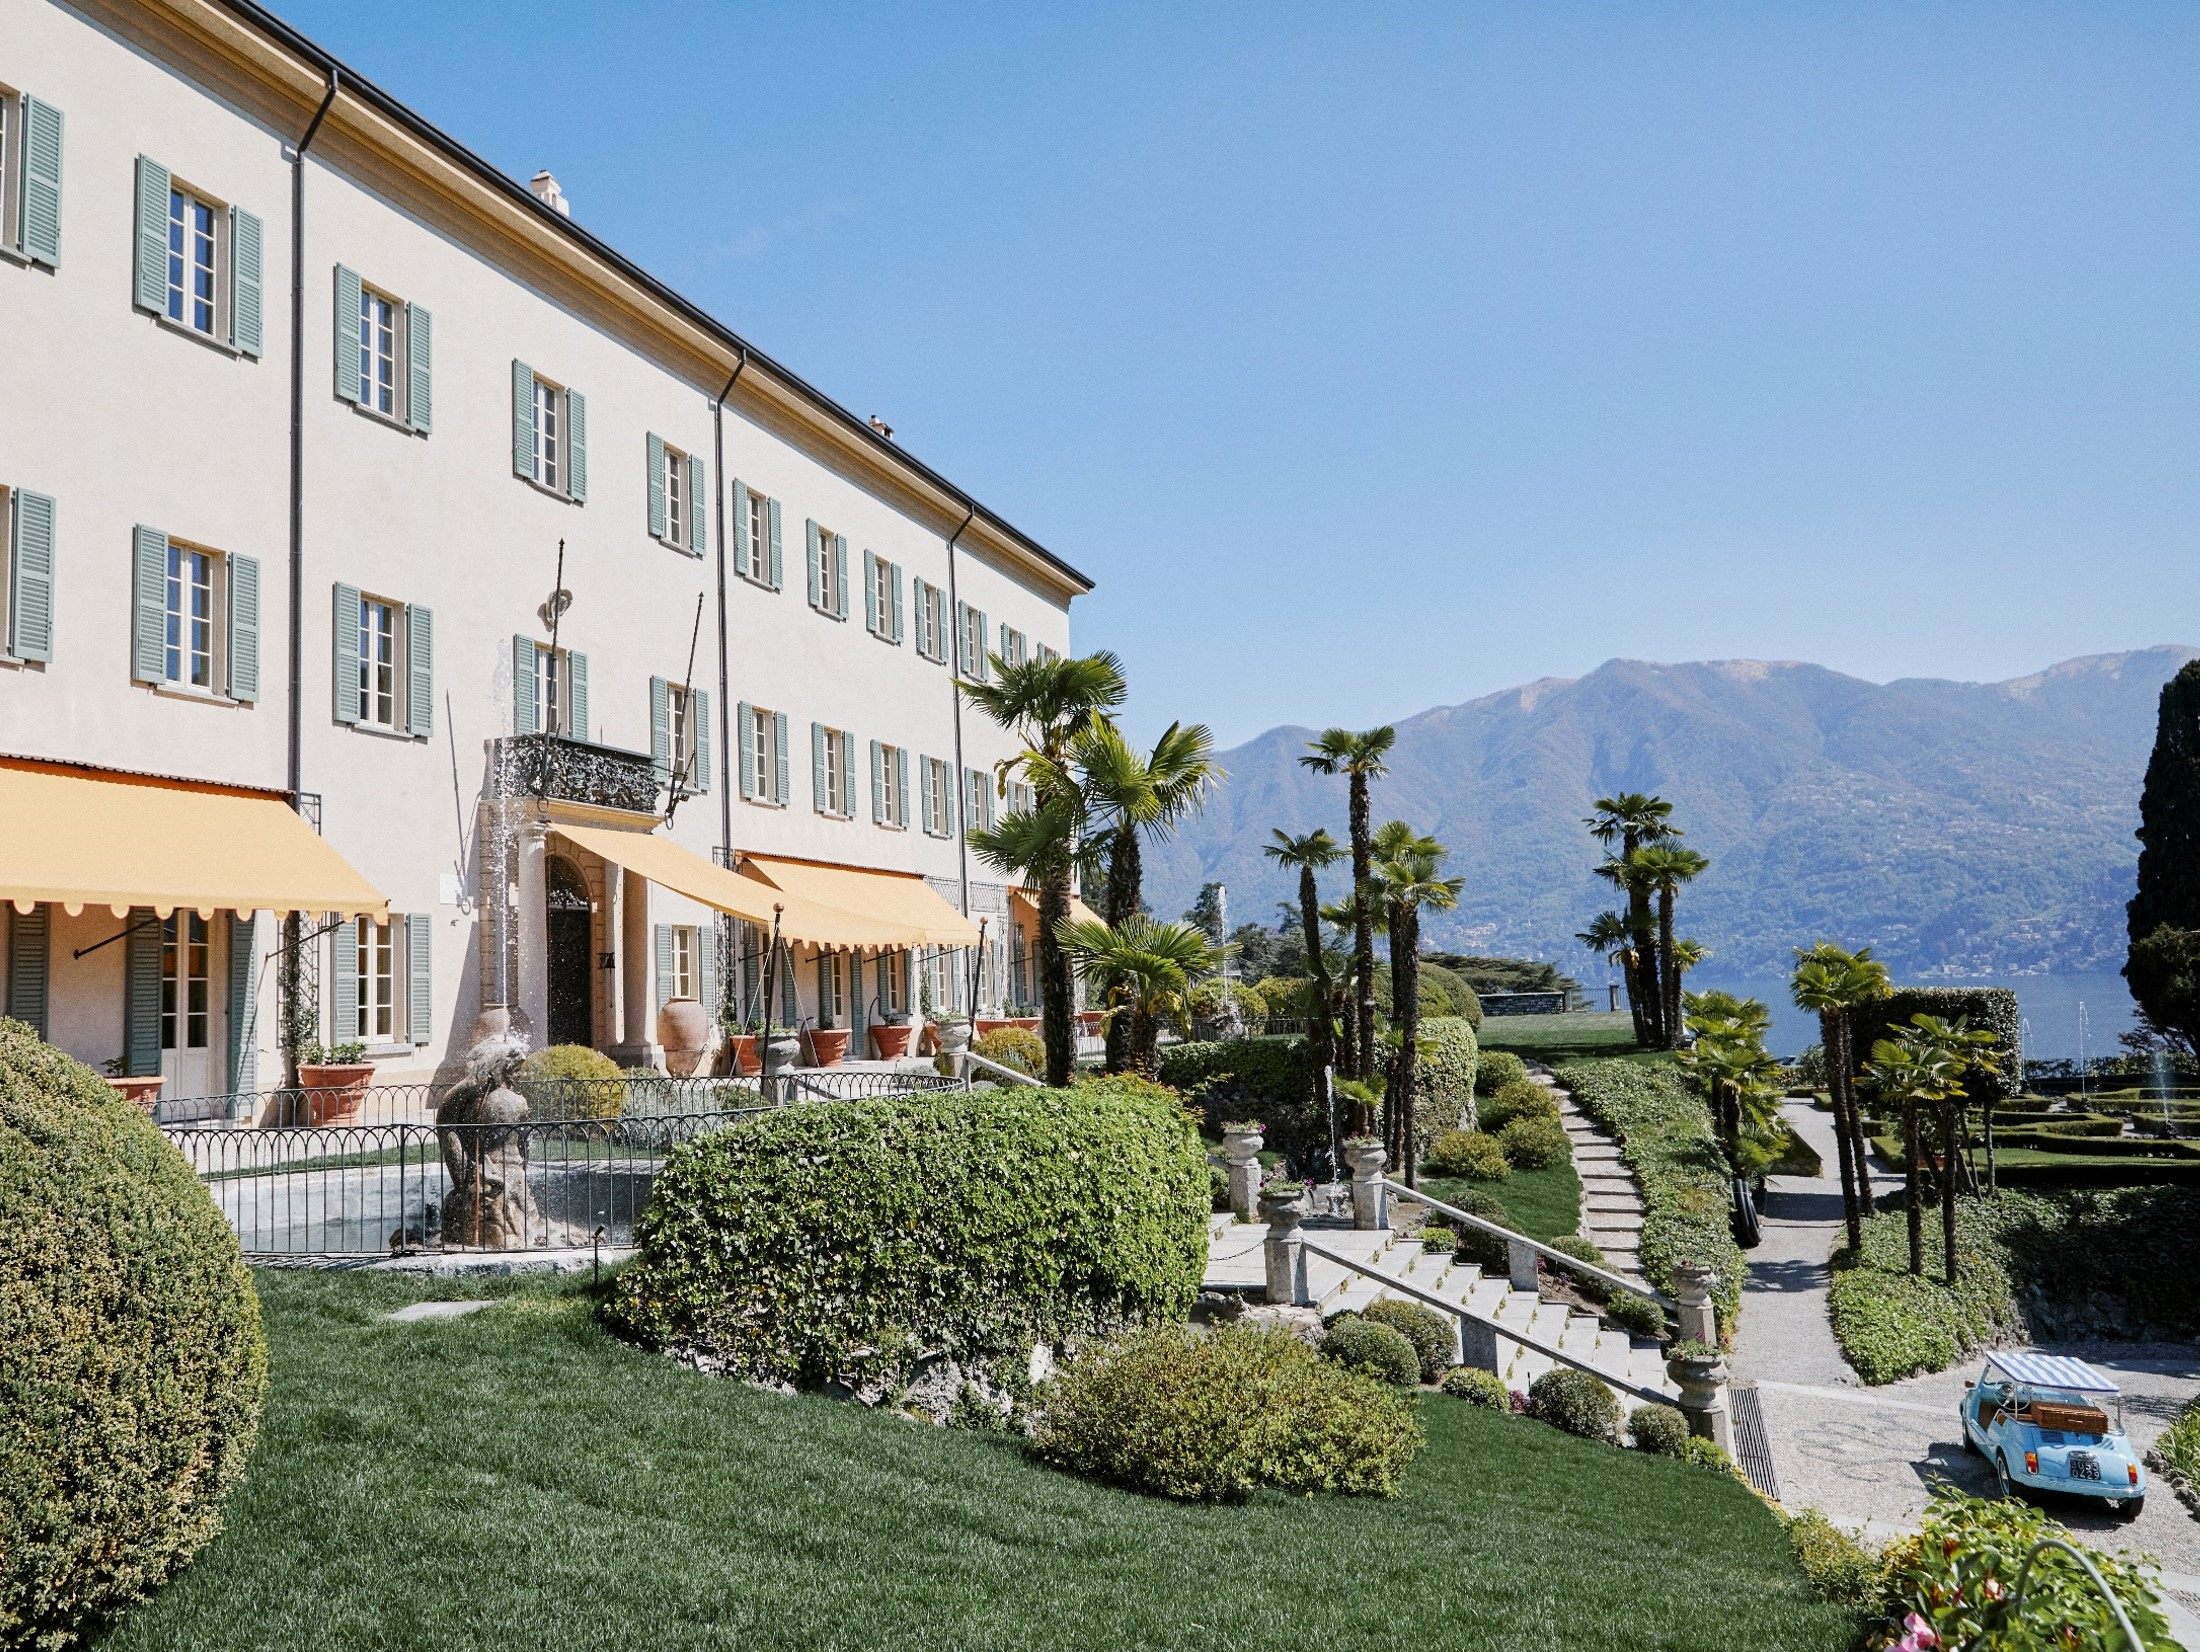 Winston Churchill, Napoleon, Martha Stewart and Kate Moss have all stayed at this stunning villa on Lake Como